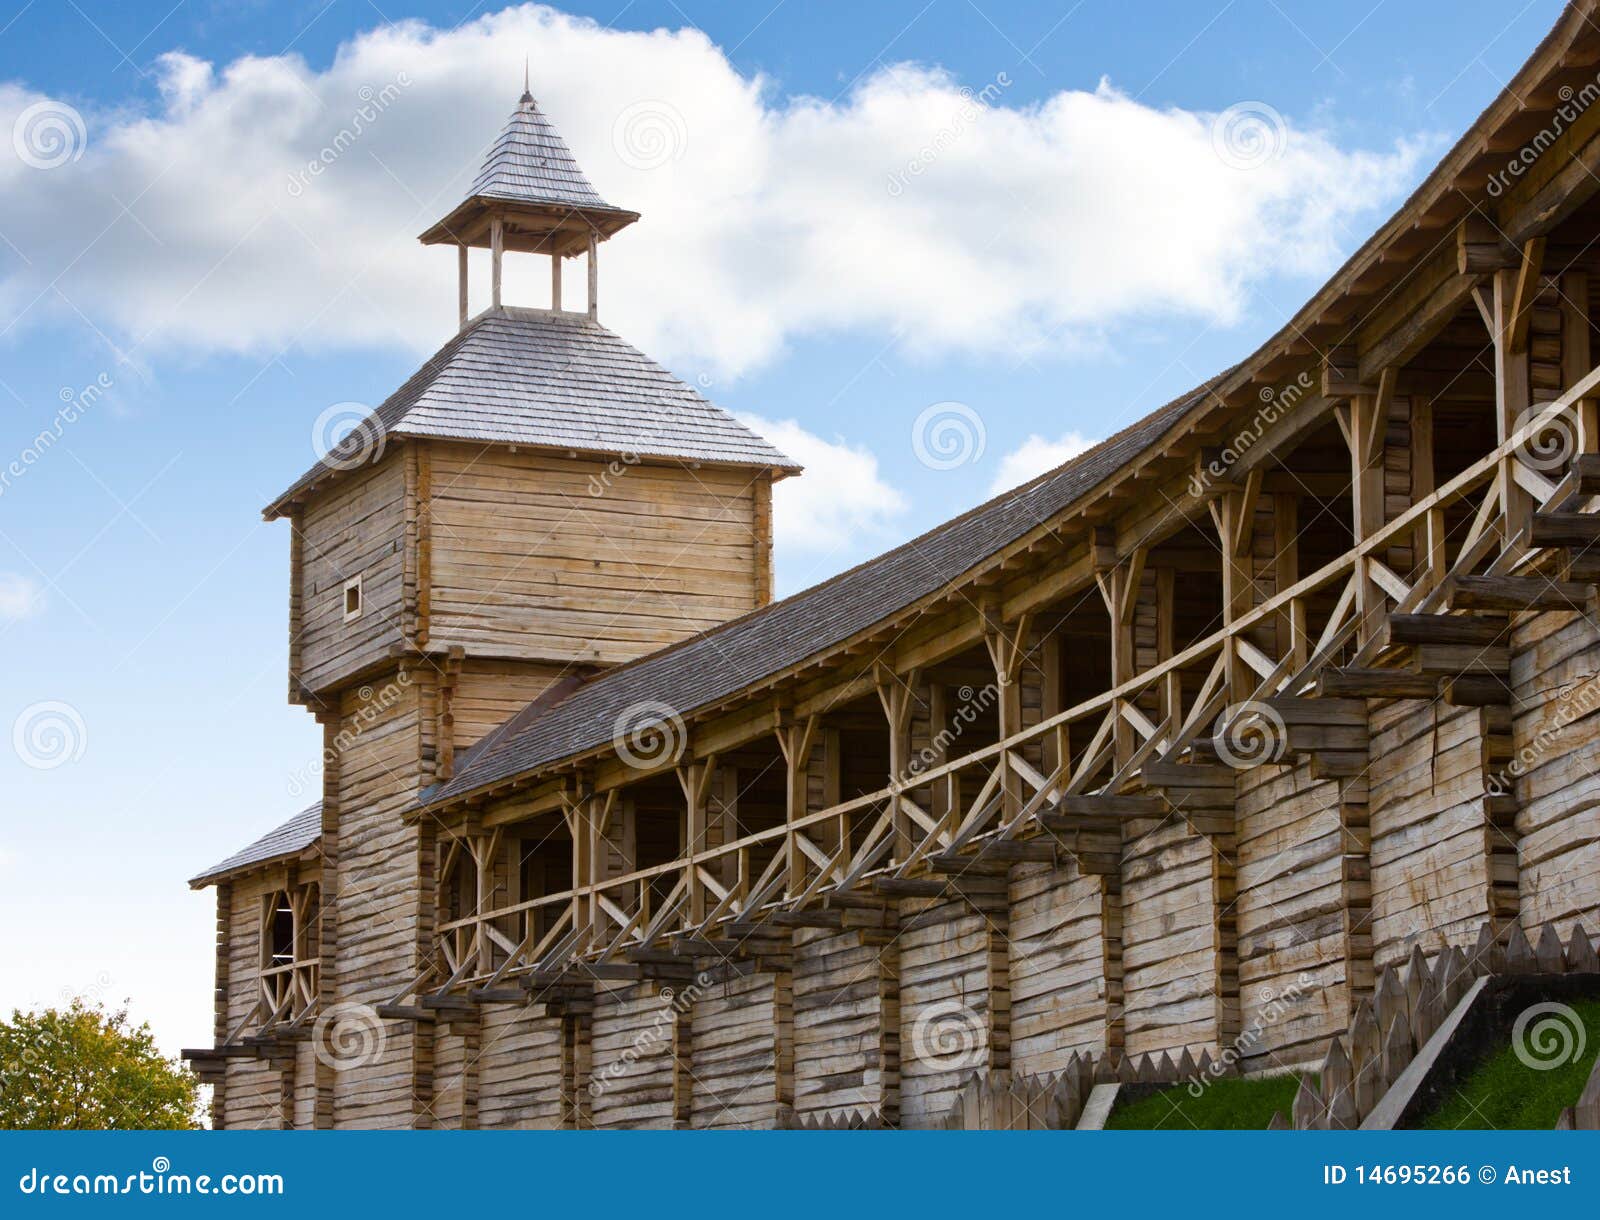 ancient-wooden-watch-tower-fortification-14695266.jpg